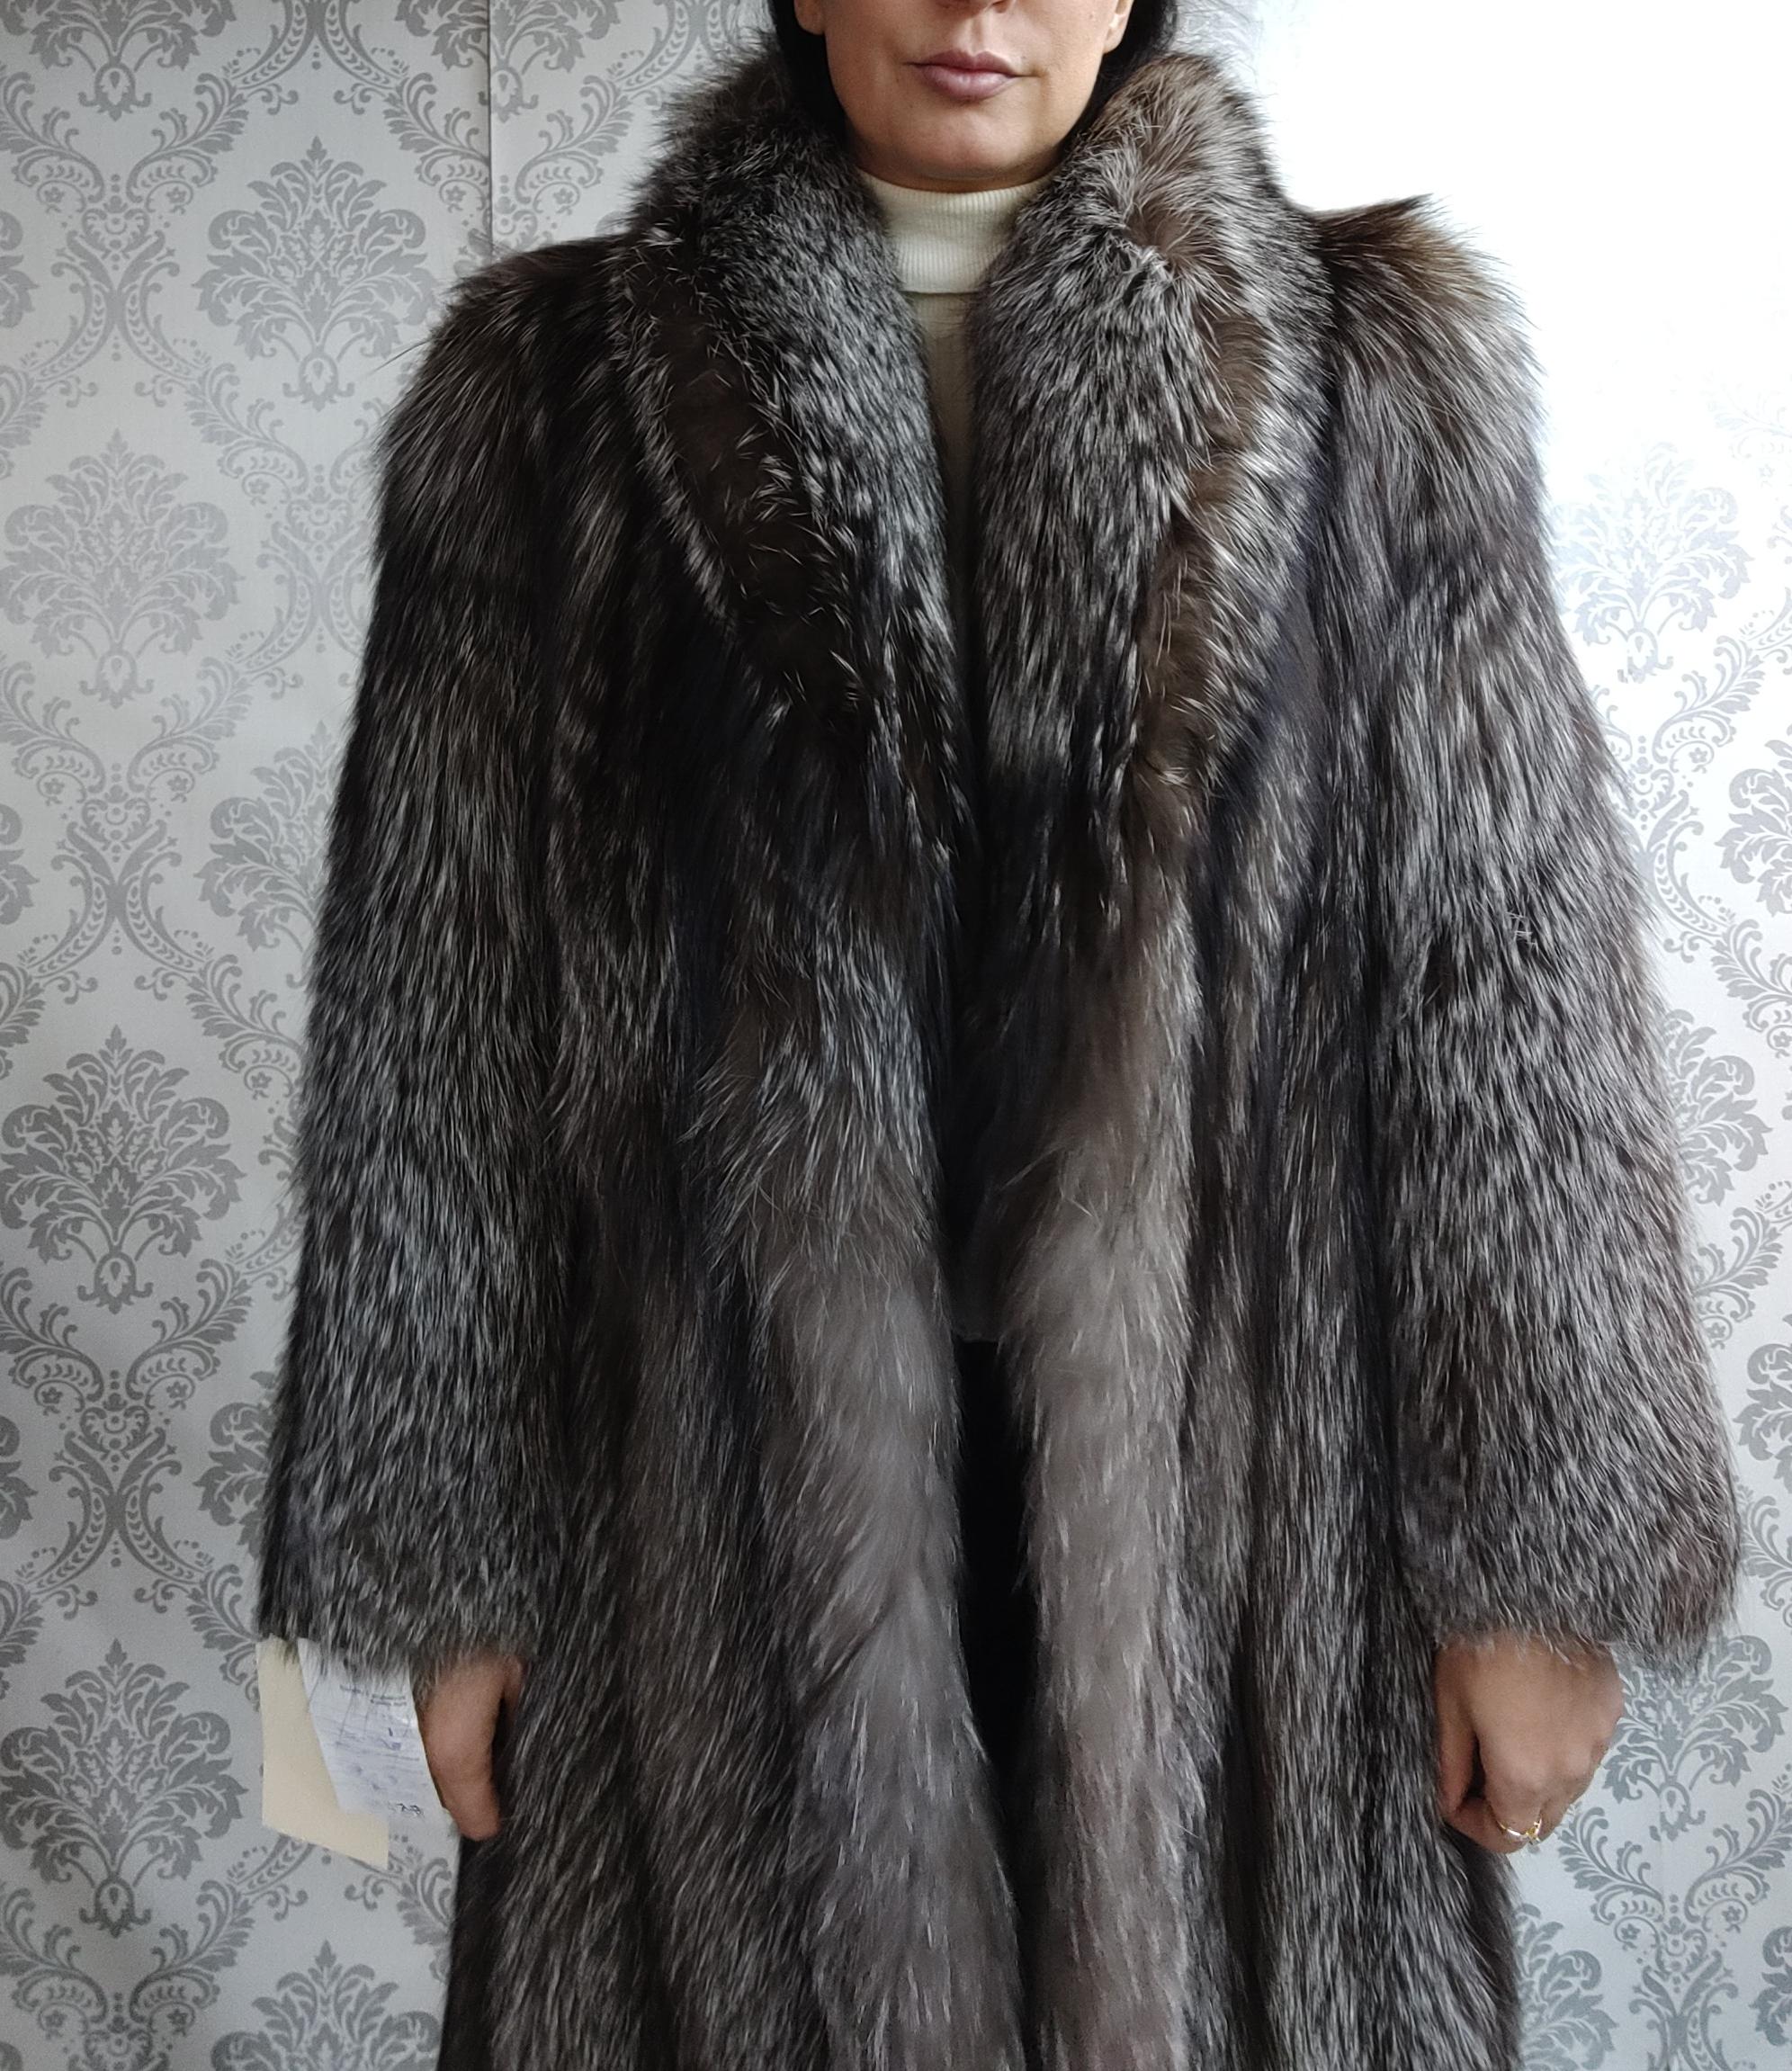 PRODUCT DESCRIPTION:

Brand new SAGA stylish Silver fox fur mid-length coat 

Condition: Like New

Closure: Hooks & Eyes

Color: Black, silver and gray

Material: Silver Fox

Garment type: Mid-length Coat

Sleeves: Straight

Pockets: Two side